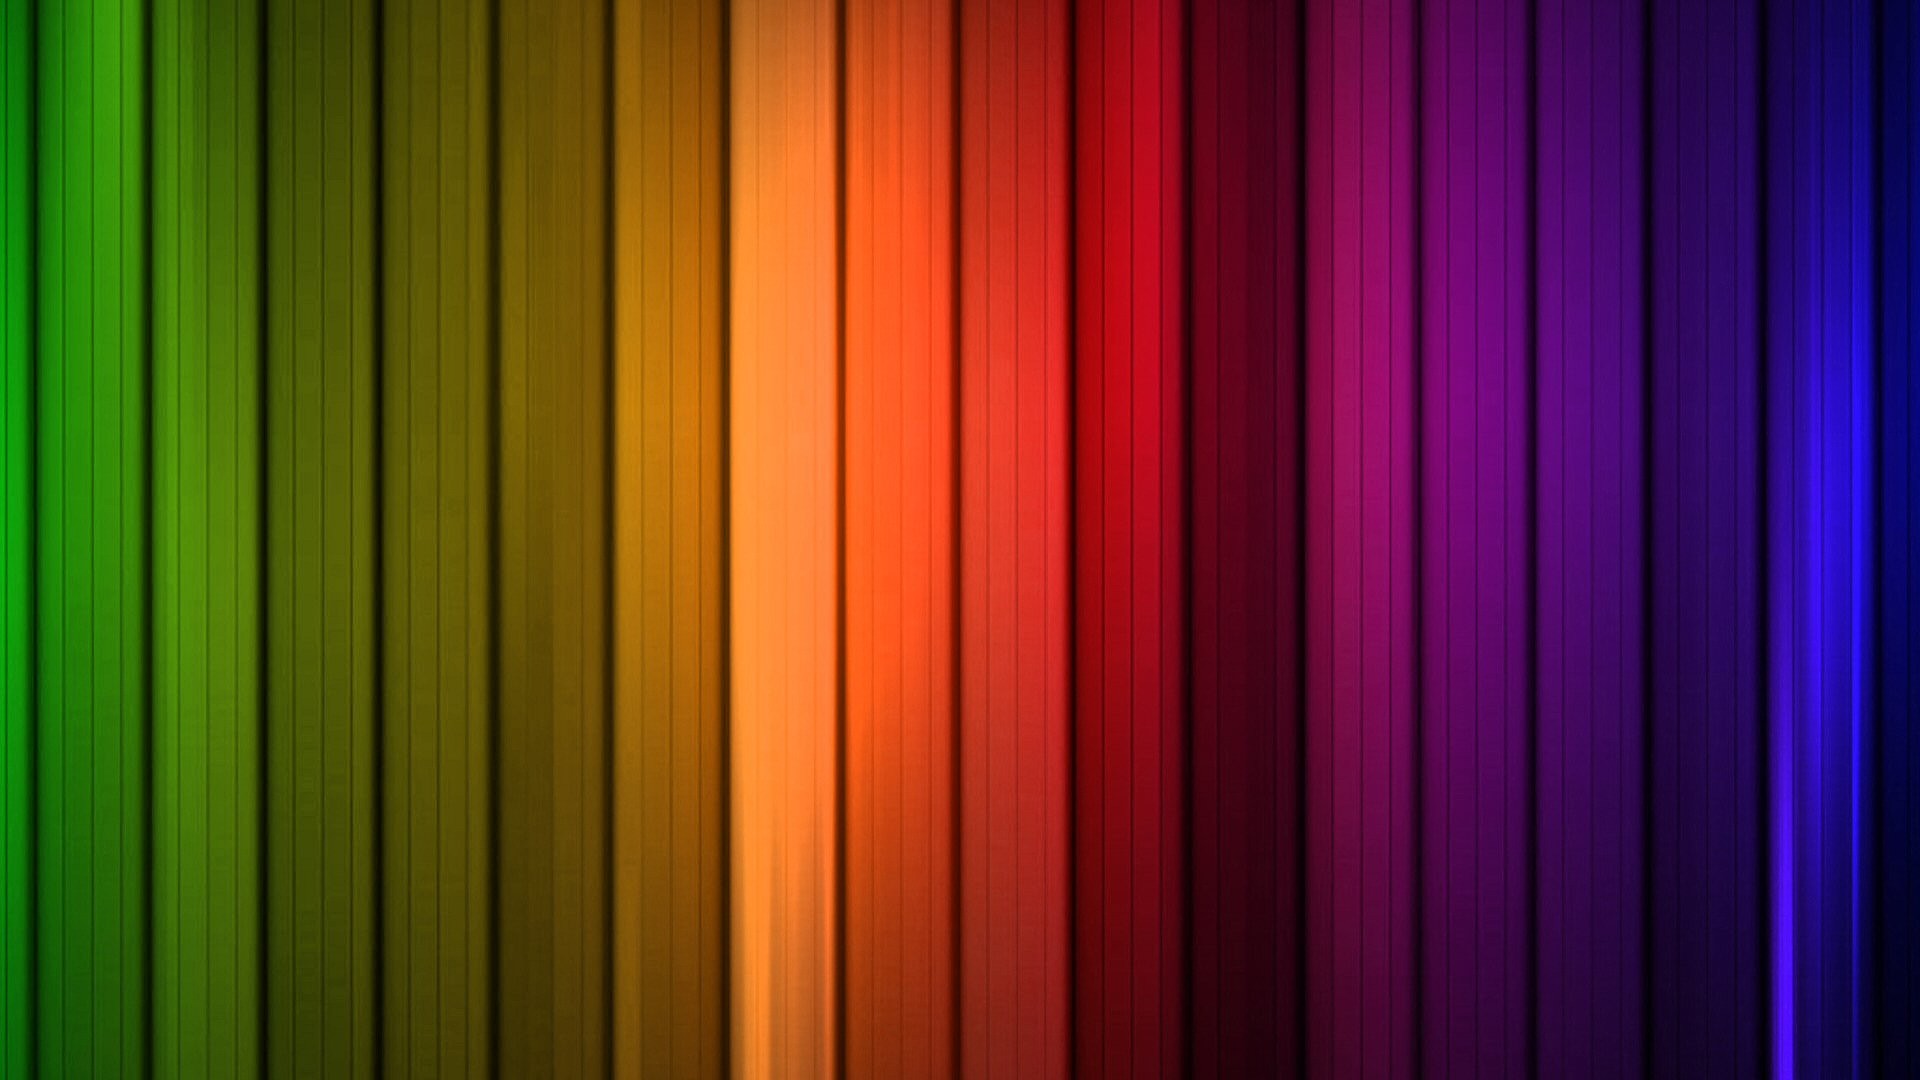 Wallpaper Rainbow HD With Resolution 1920X1080 pixel. You can make this wallpaper for your Desktop Computer Backgrounds, Mac Wallpapers, Android Lock screen or iPhone Screensavers